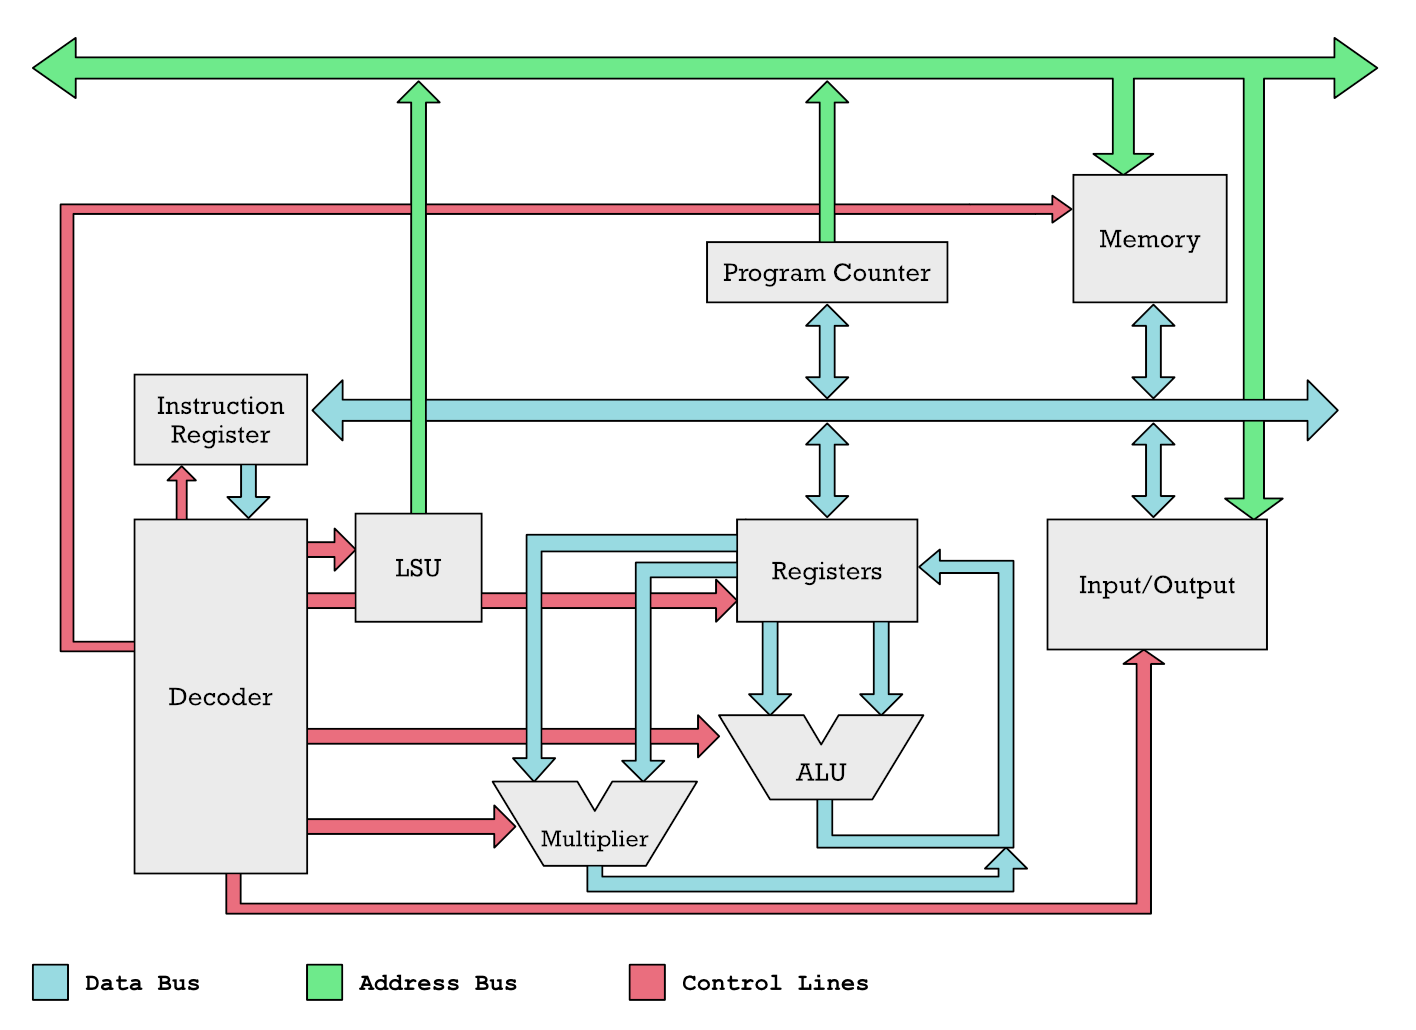 Overview of how a Microprocessor works. Numbers move along colored lines. Input/Output can be coprocessors, mouse, keyboard and other devices.